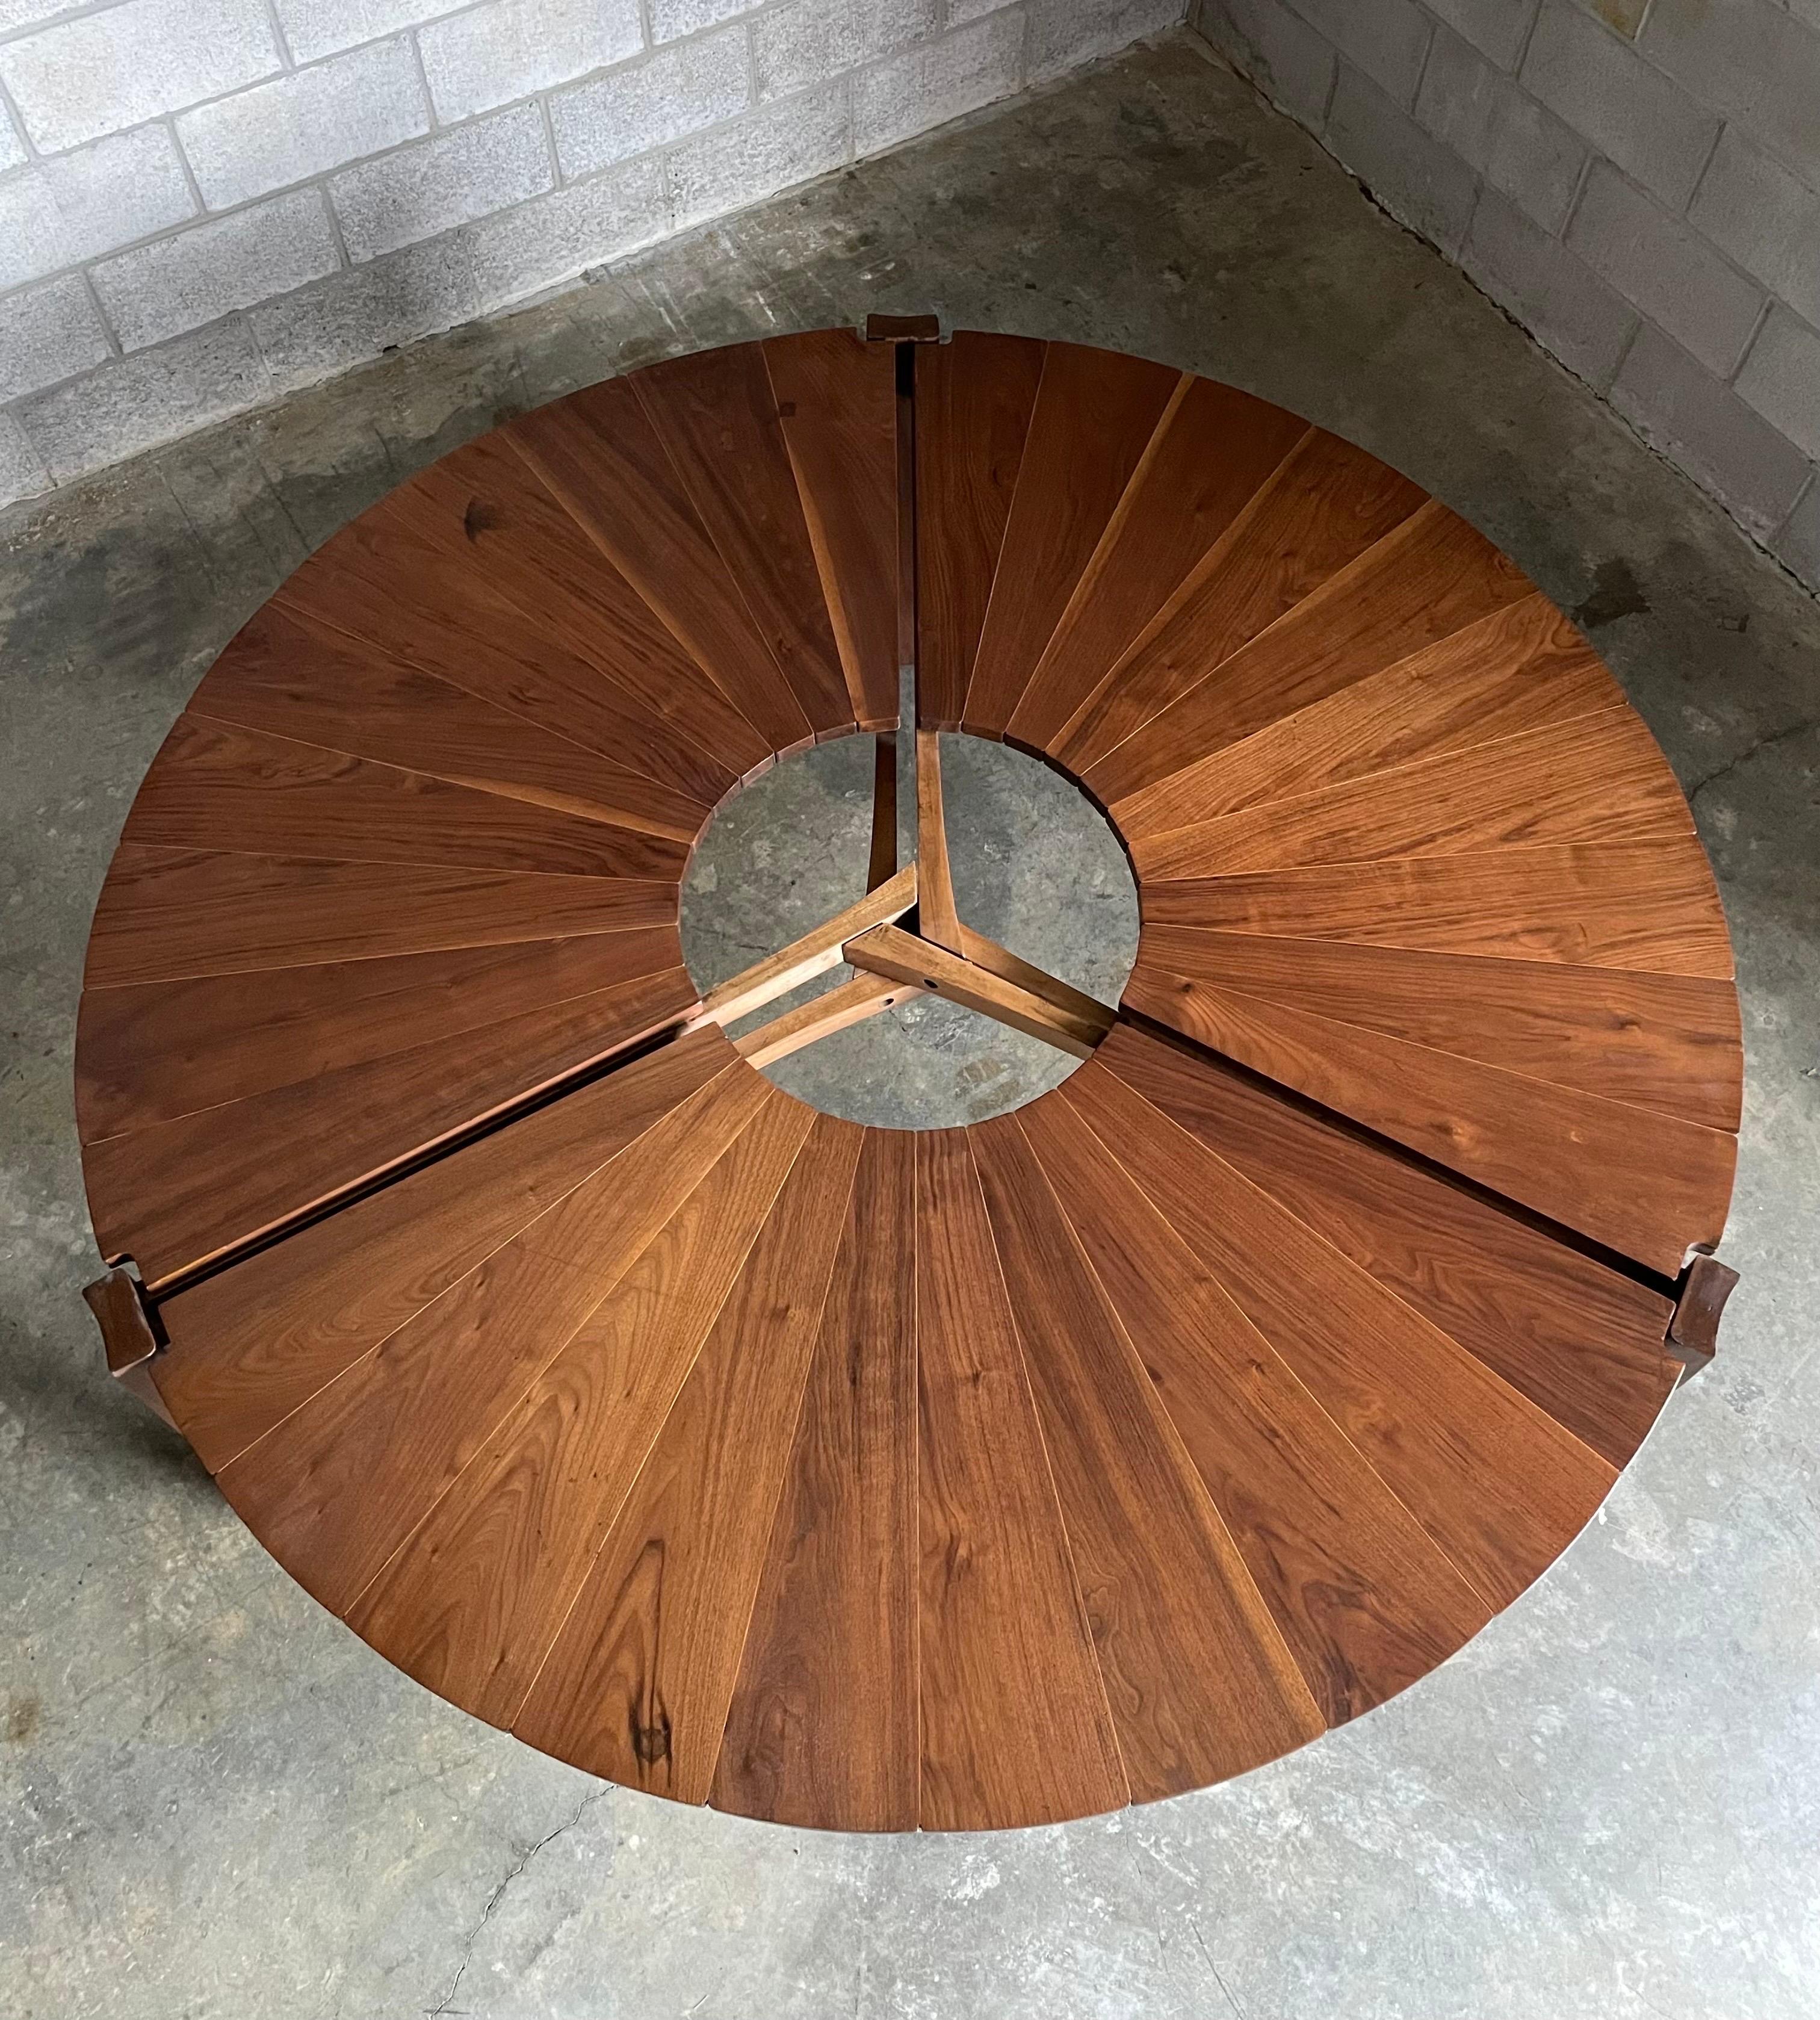 An incredible, one of a kind, dining table designed and made by Charles Faucher in 1975. Table consists of three leg posts with a section of walnut petals between each leg. Walnut petals are separated by thin pieces of maple adding to the dramatic